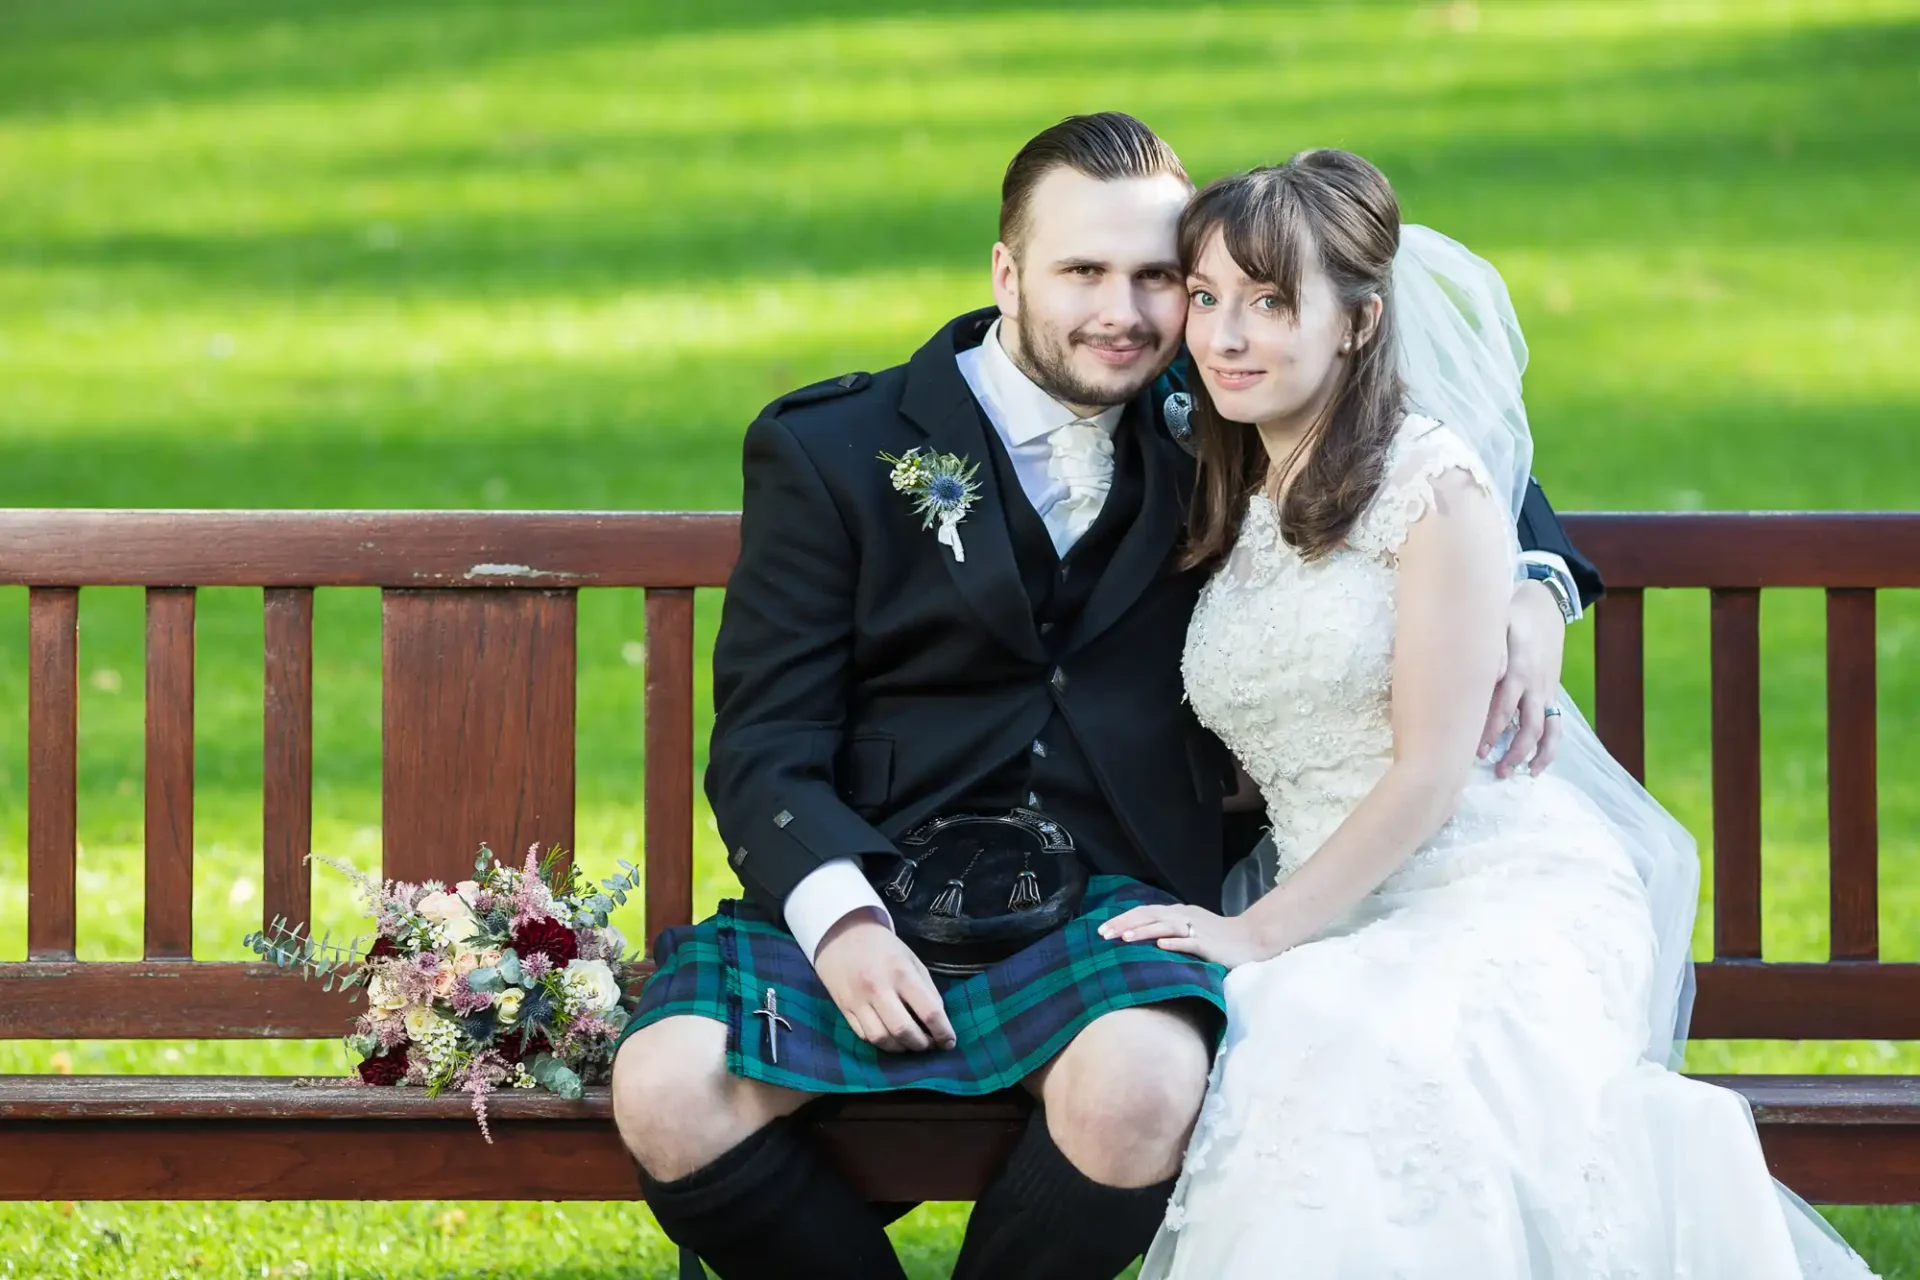 A bride and groom smiling and sitting closely on a park bench; the groom is wearing a kilt and the bride a white dress with a bouquet beside them.